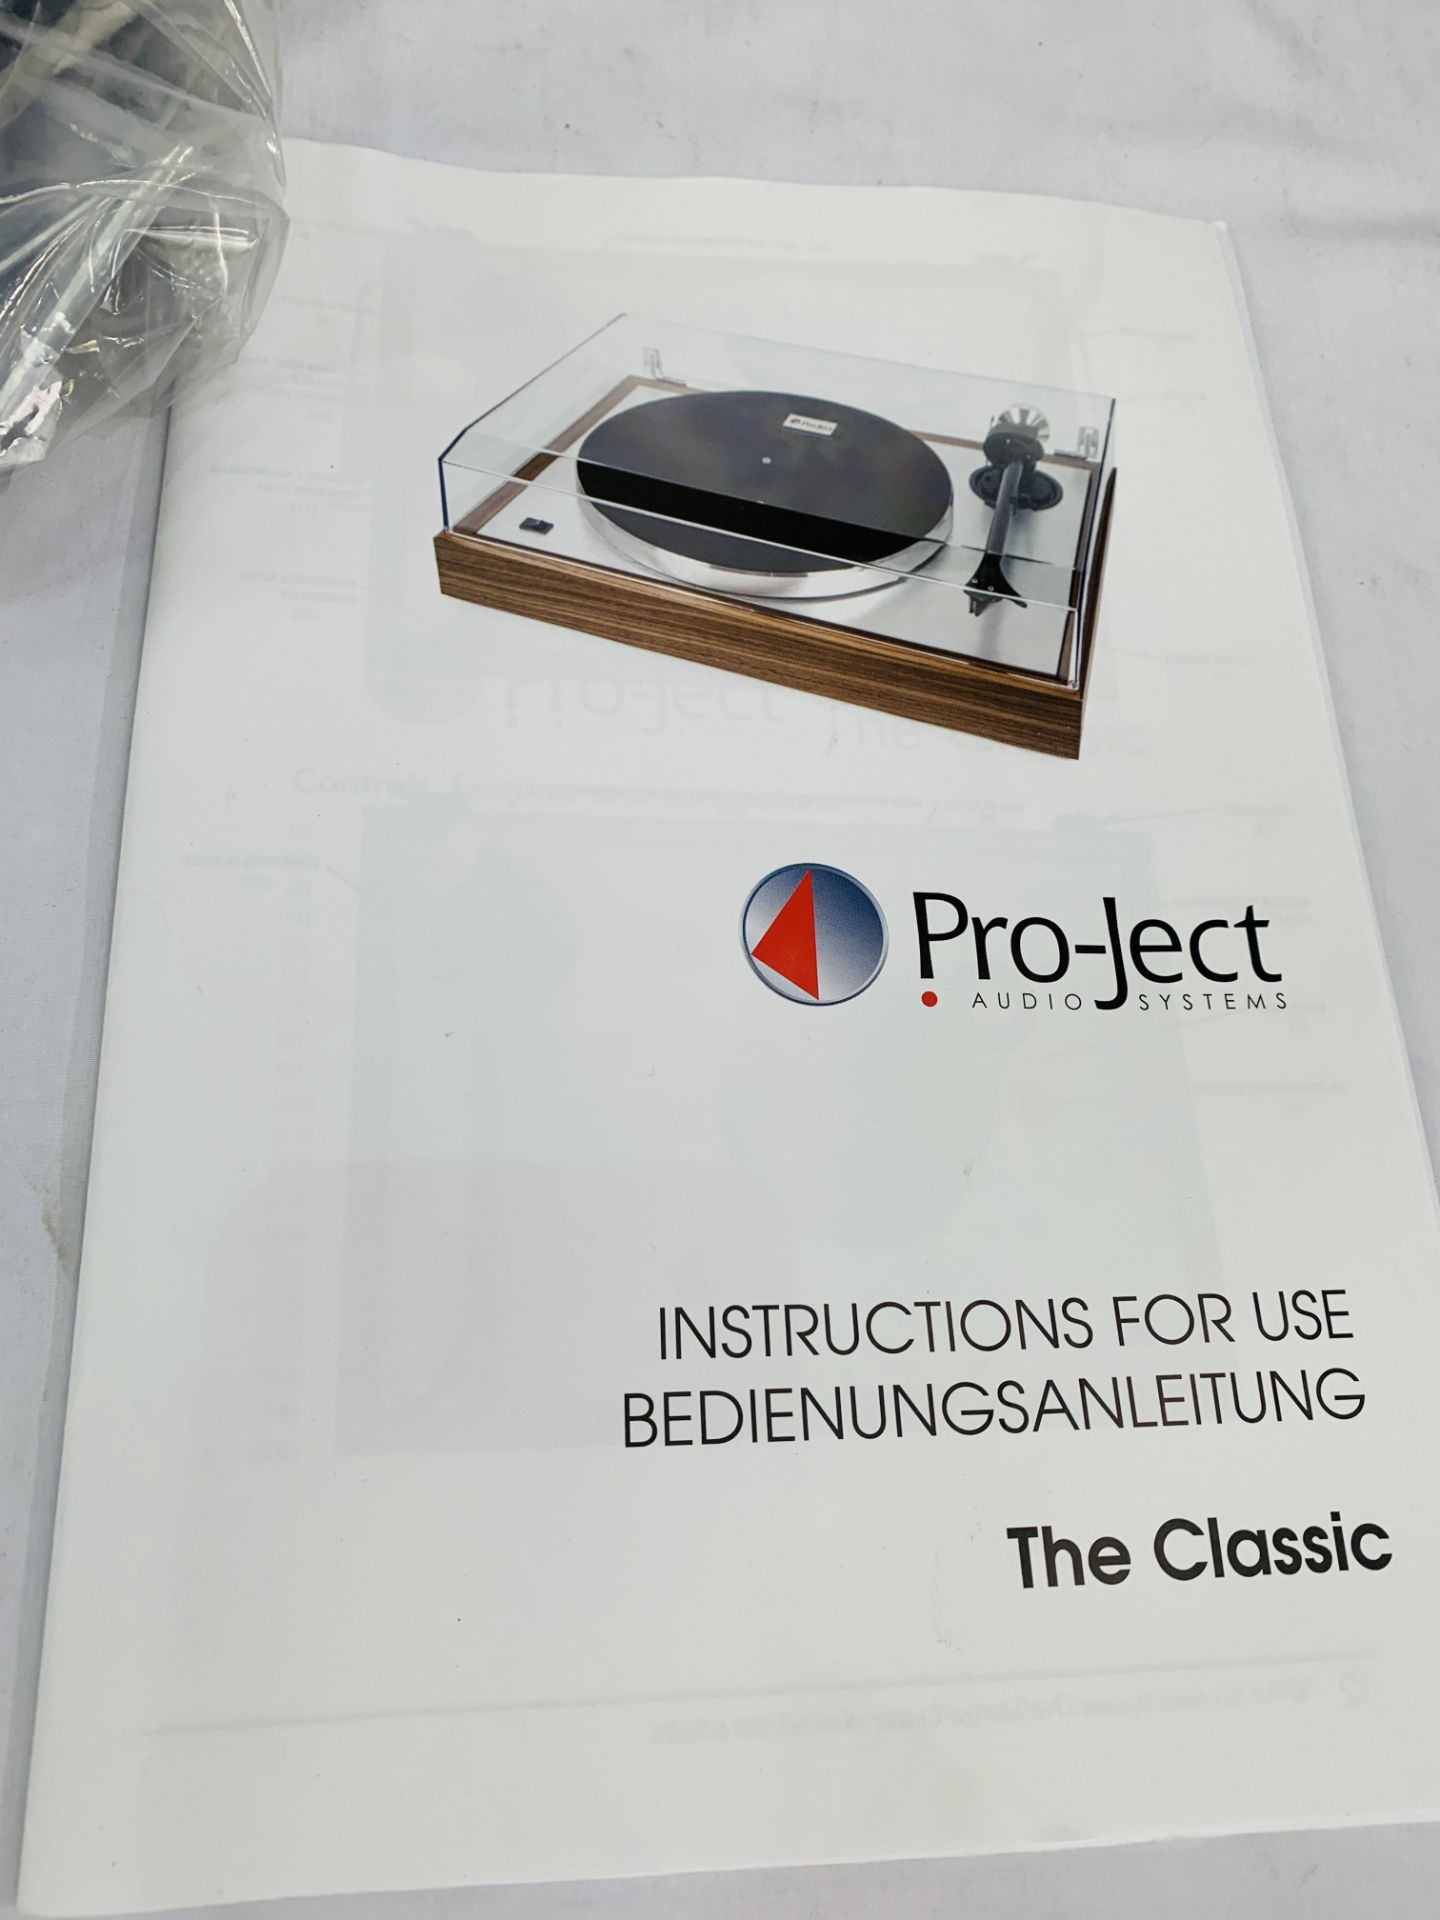 Pro-Ject 'The Classic' turntable complete with power supply, stylus and instruction manual. - Image 3 of 3